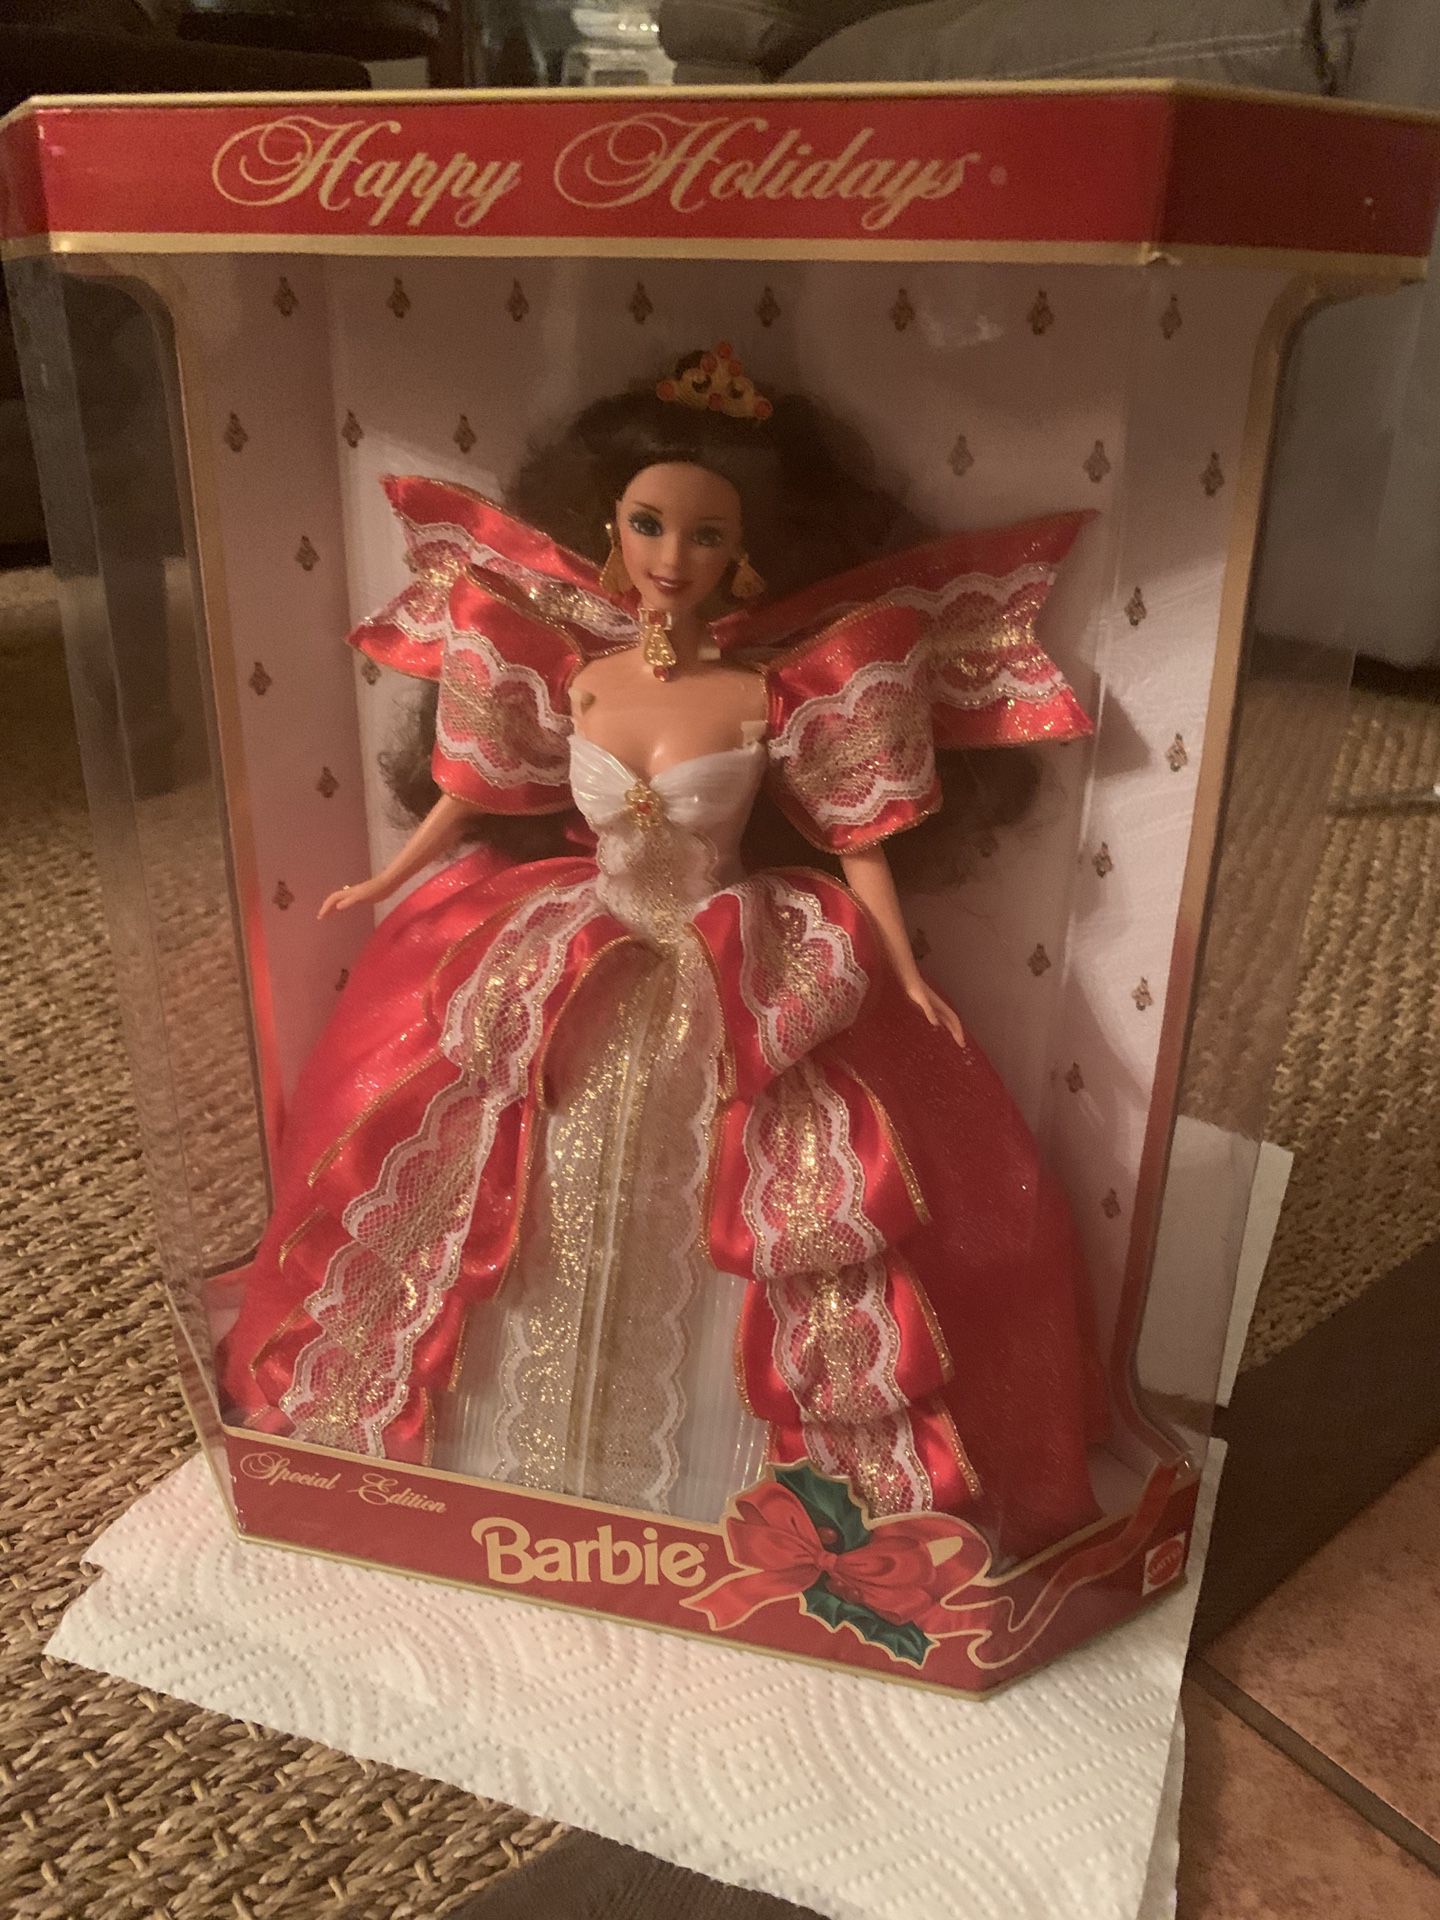 HAPPY HOLIDAYS RARE 1997 SPECIAL EDITION BARBIE DOLL